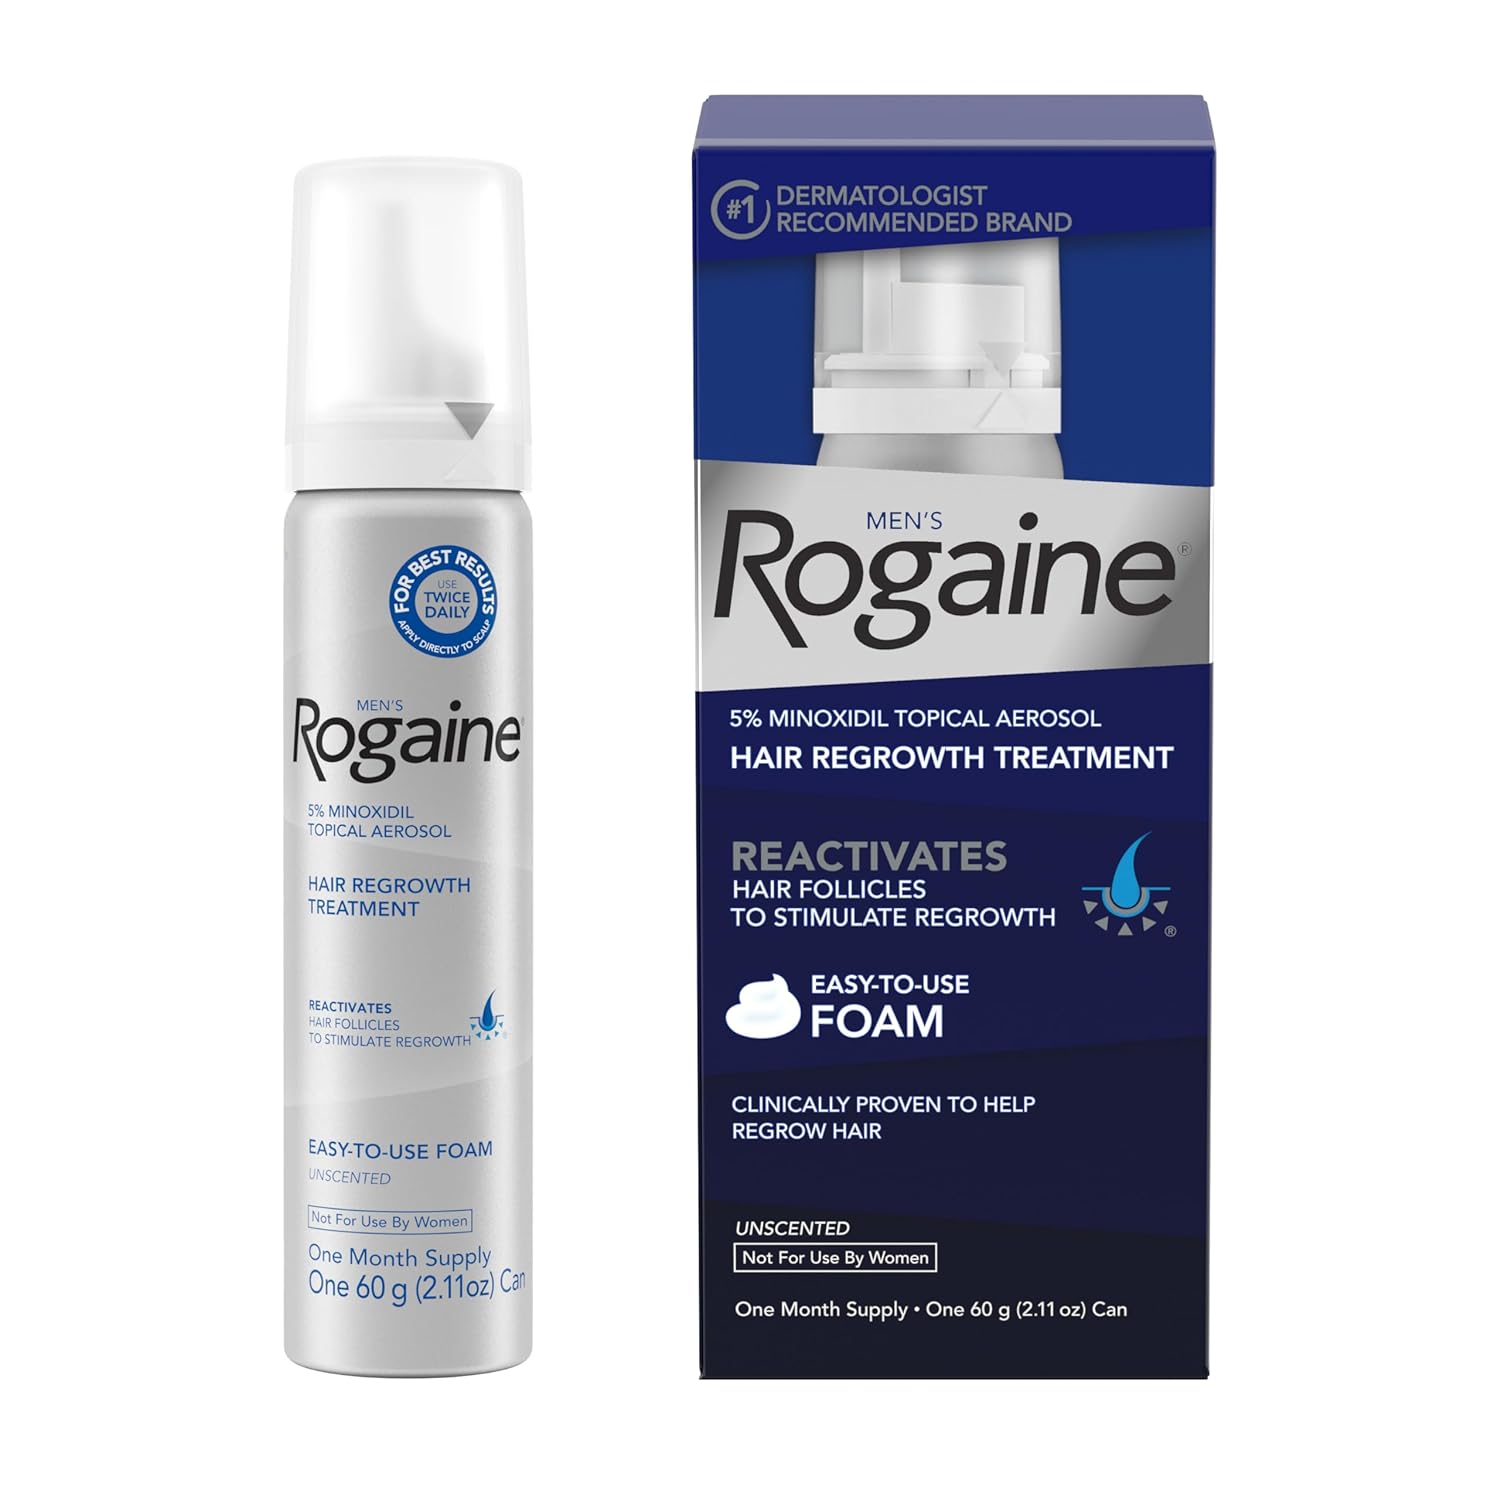 Men's Rogaine 5% Minoxidil Foam for Hair Loss and Hair Regrowth - Thinning Hair Treatment, Topical S